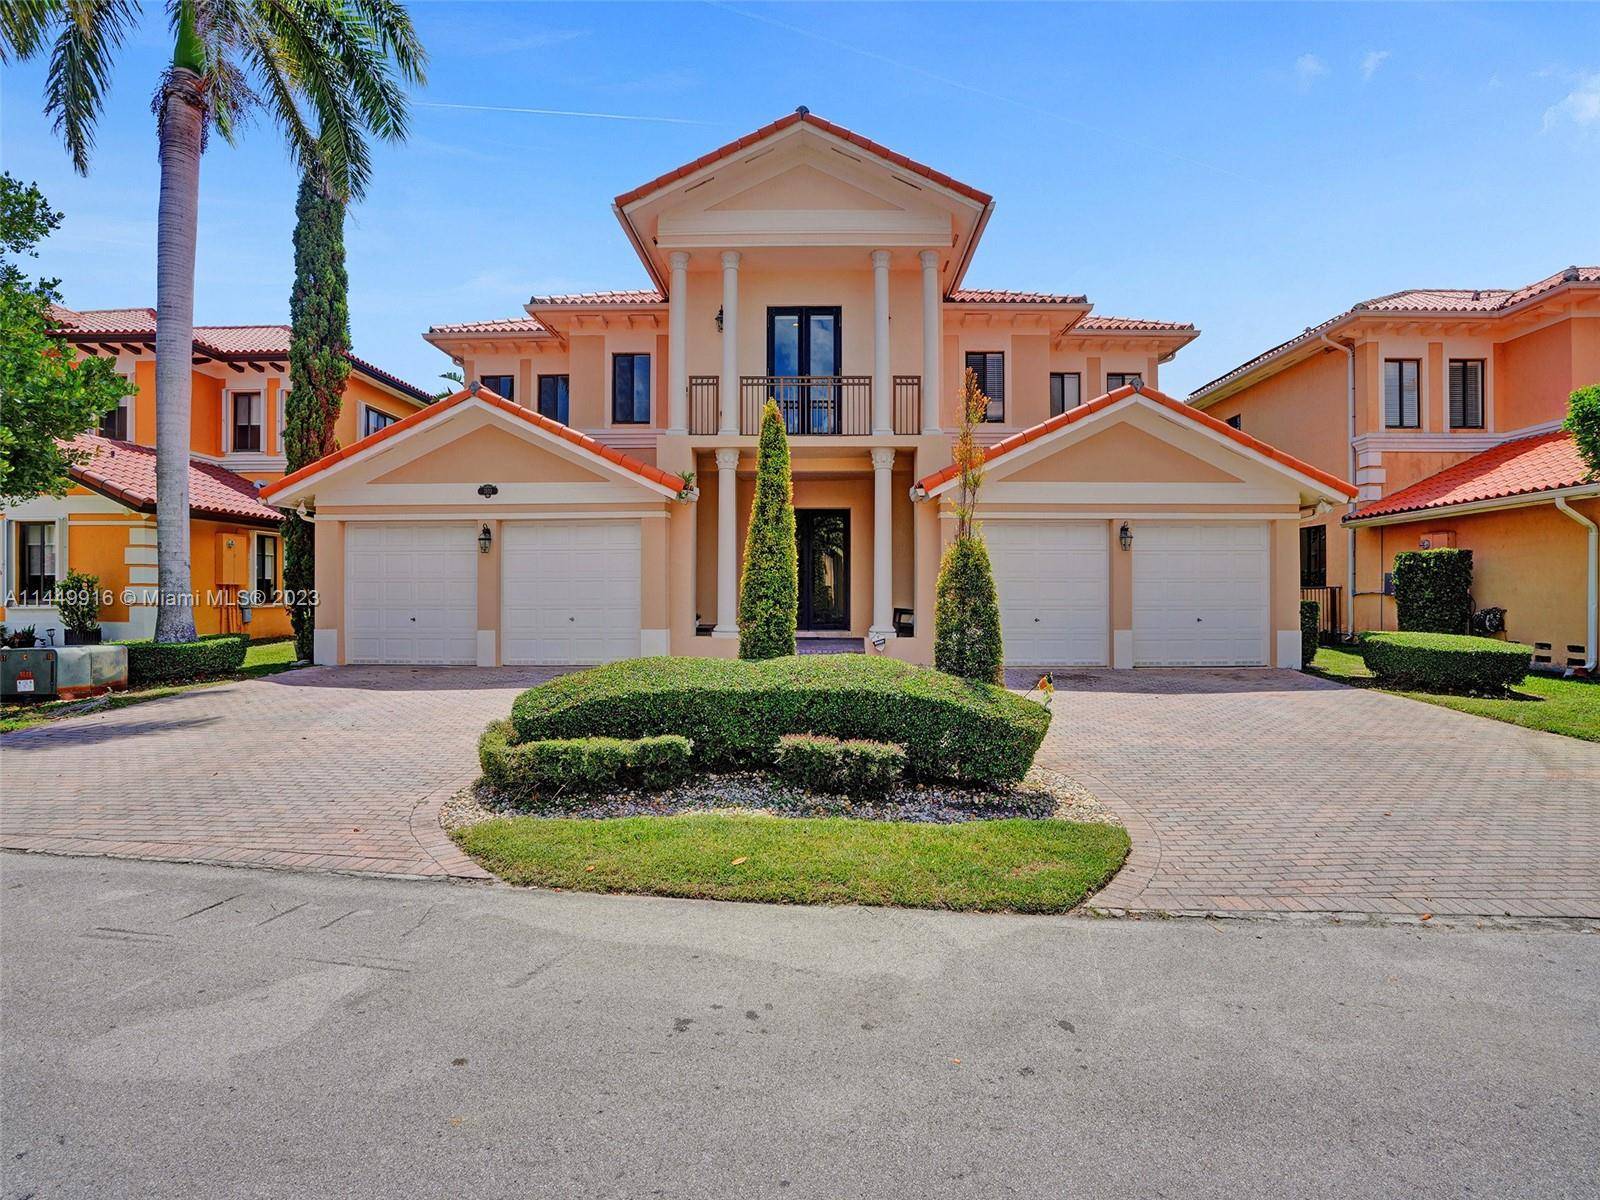 Elegant Two Story 5 Bed 4 Bath Home with Impressive Double Height Ceilings, Welcoming Foyer, Custom Pool Jacuzzi, and Expansive Deck in the Prestigious Gated Community of Cutler Cay.